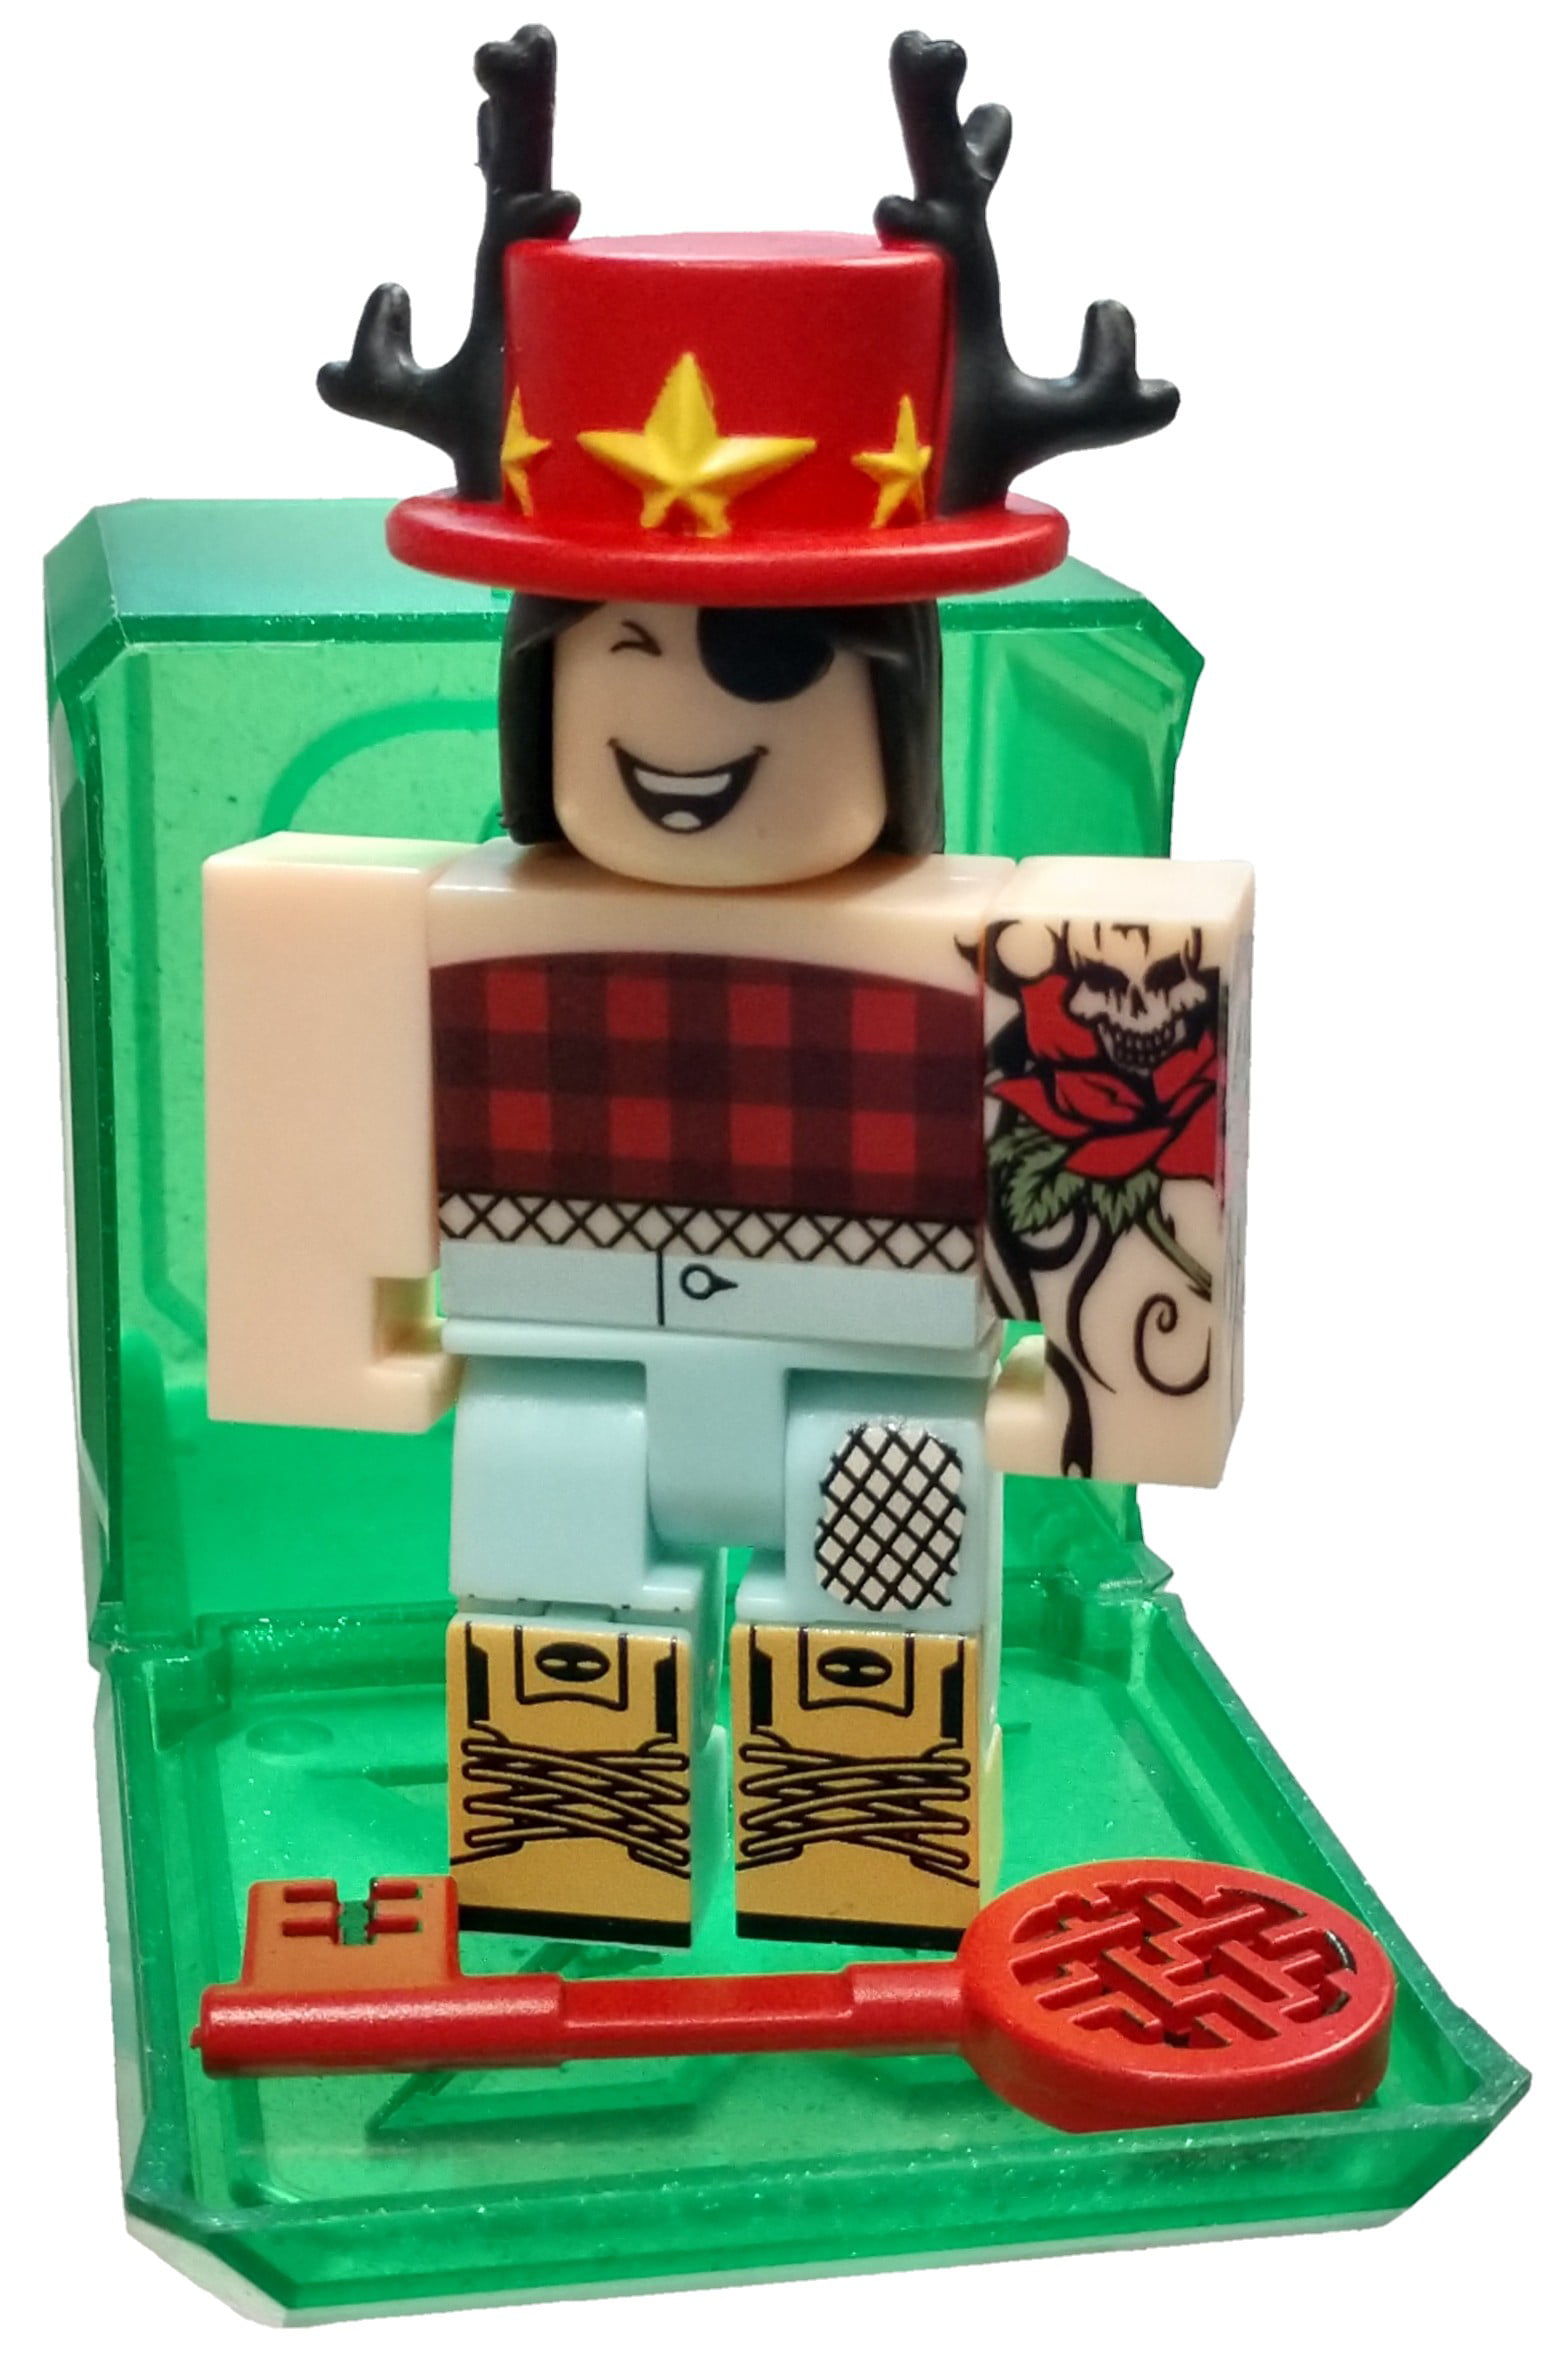 Roblox Celebrity Collection Series 4 Lavacomet Mini Figure With Green Cube And Online Code No Packaging Walmart Com Walmart Com - series 4 roblox